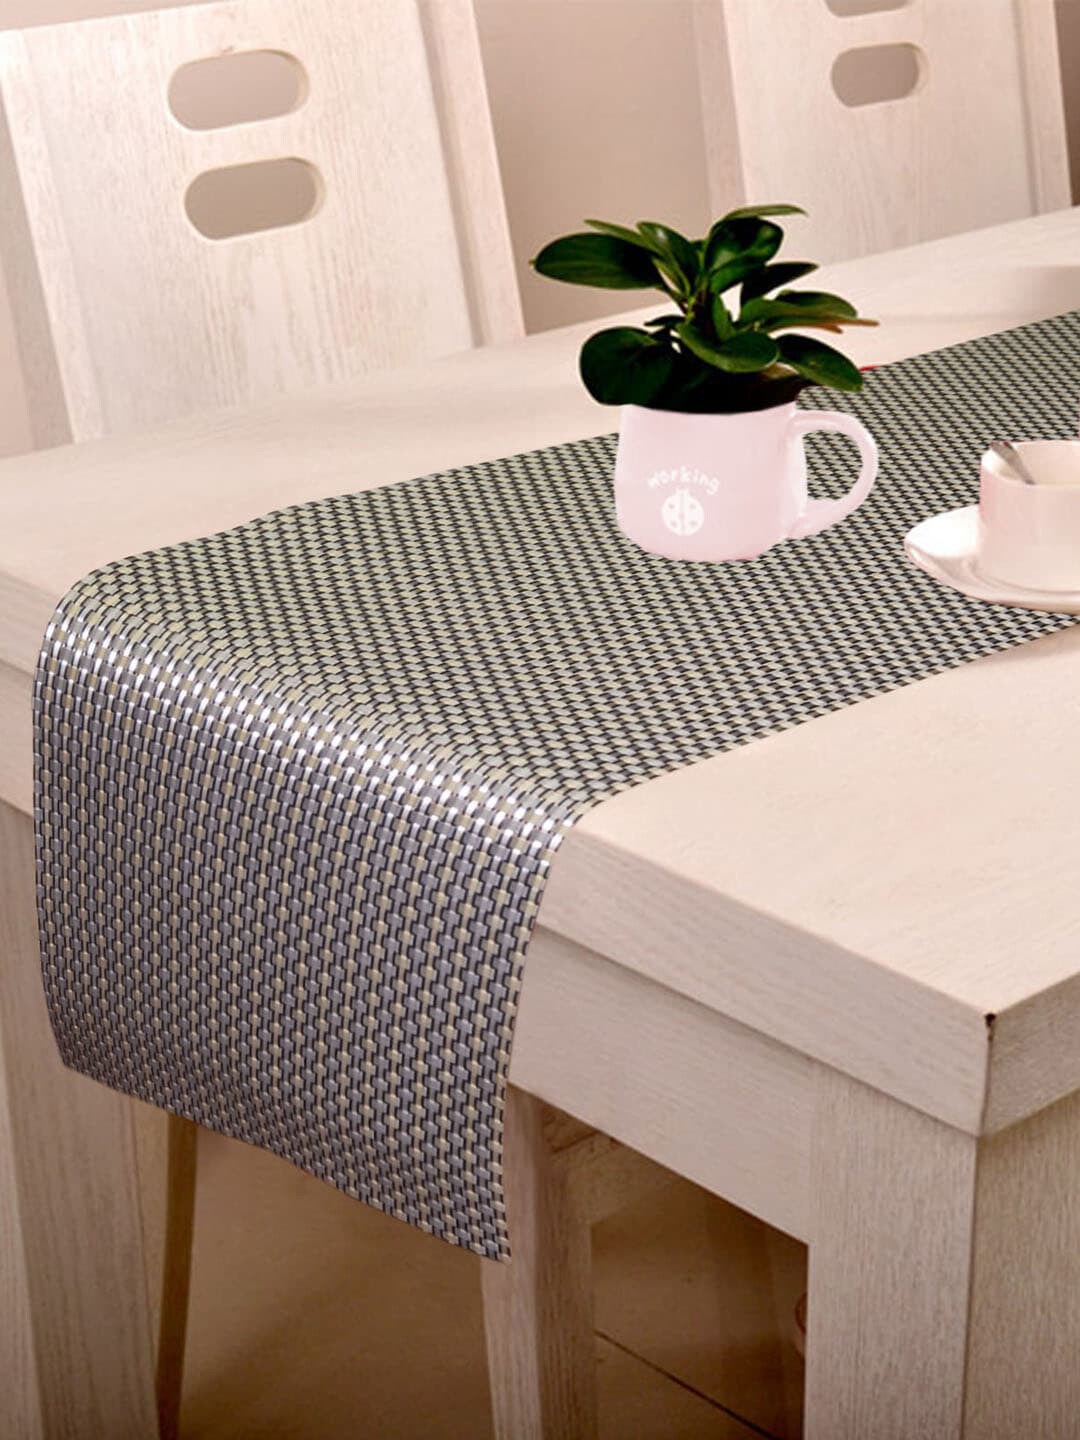 Lushomes Black & Gold-Coloured Geometric Waterproof Heat-Resistant Table Runner Price in India